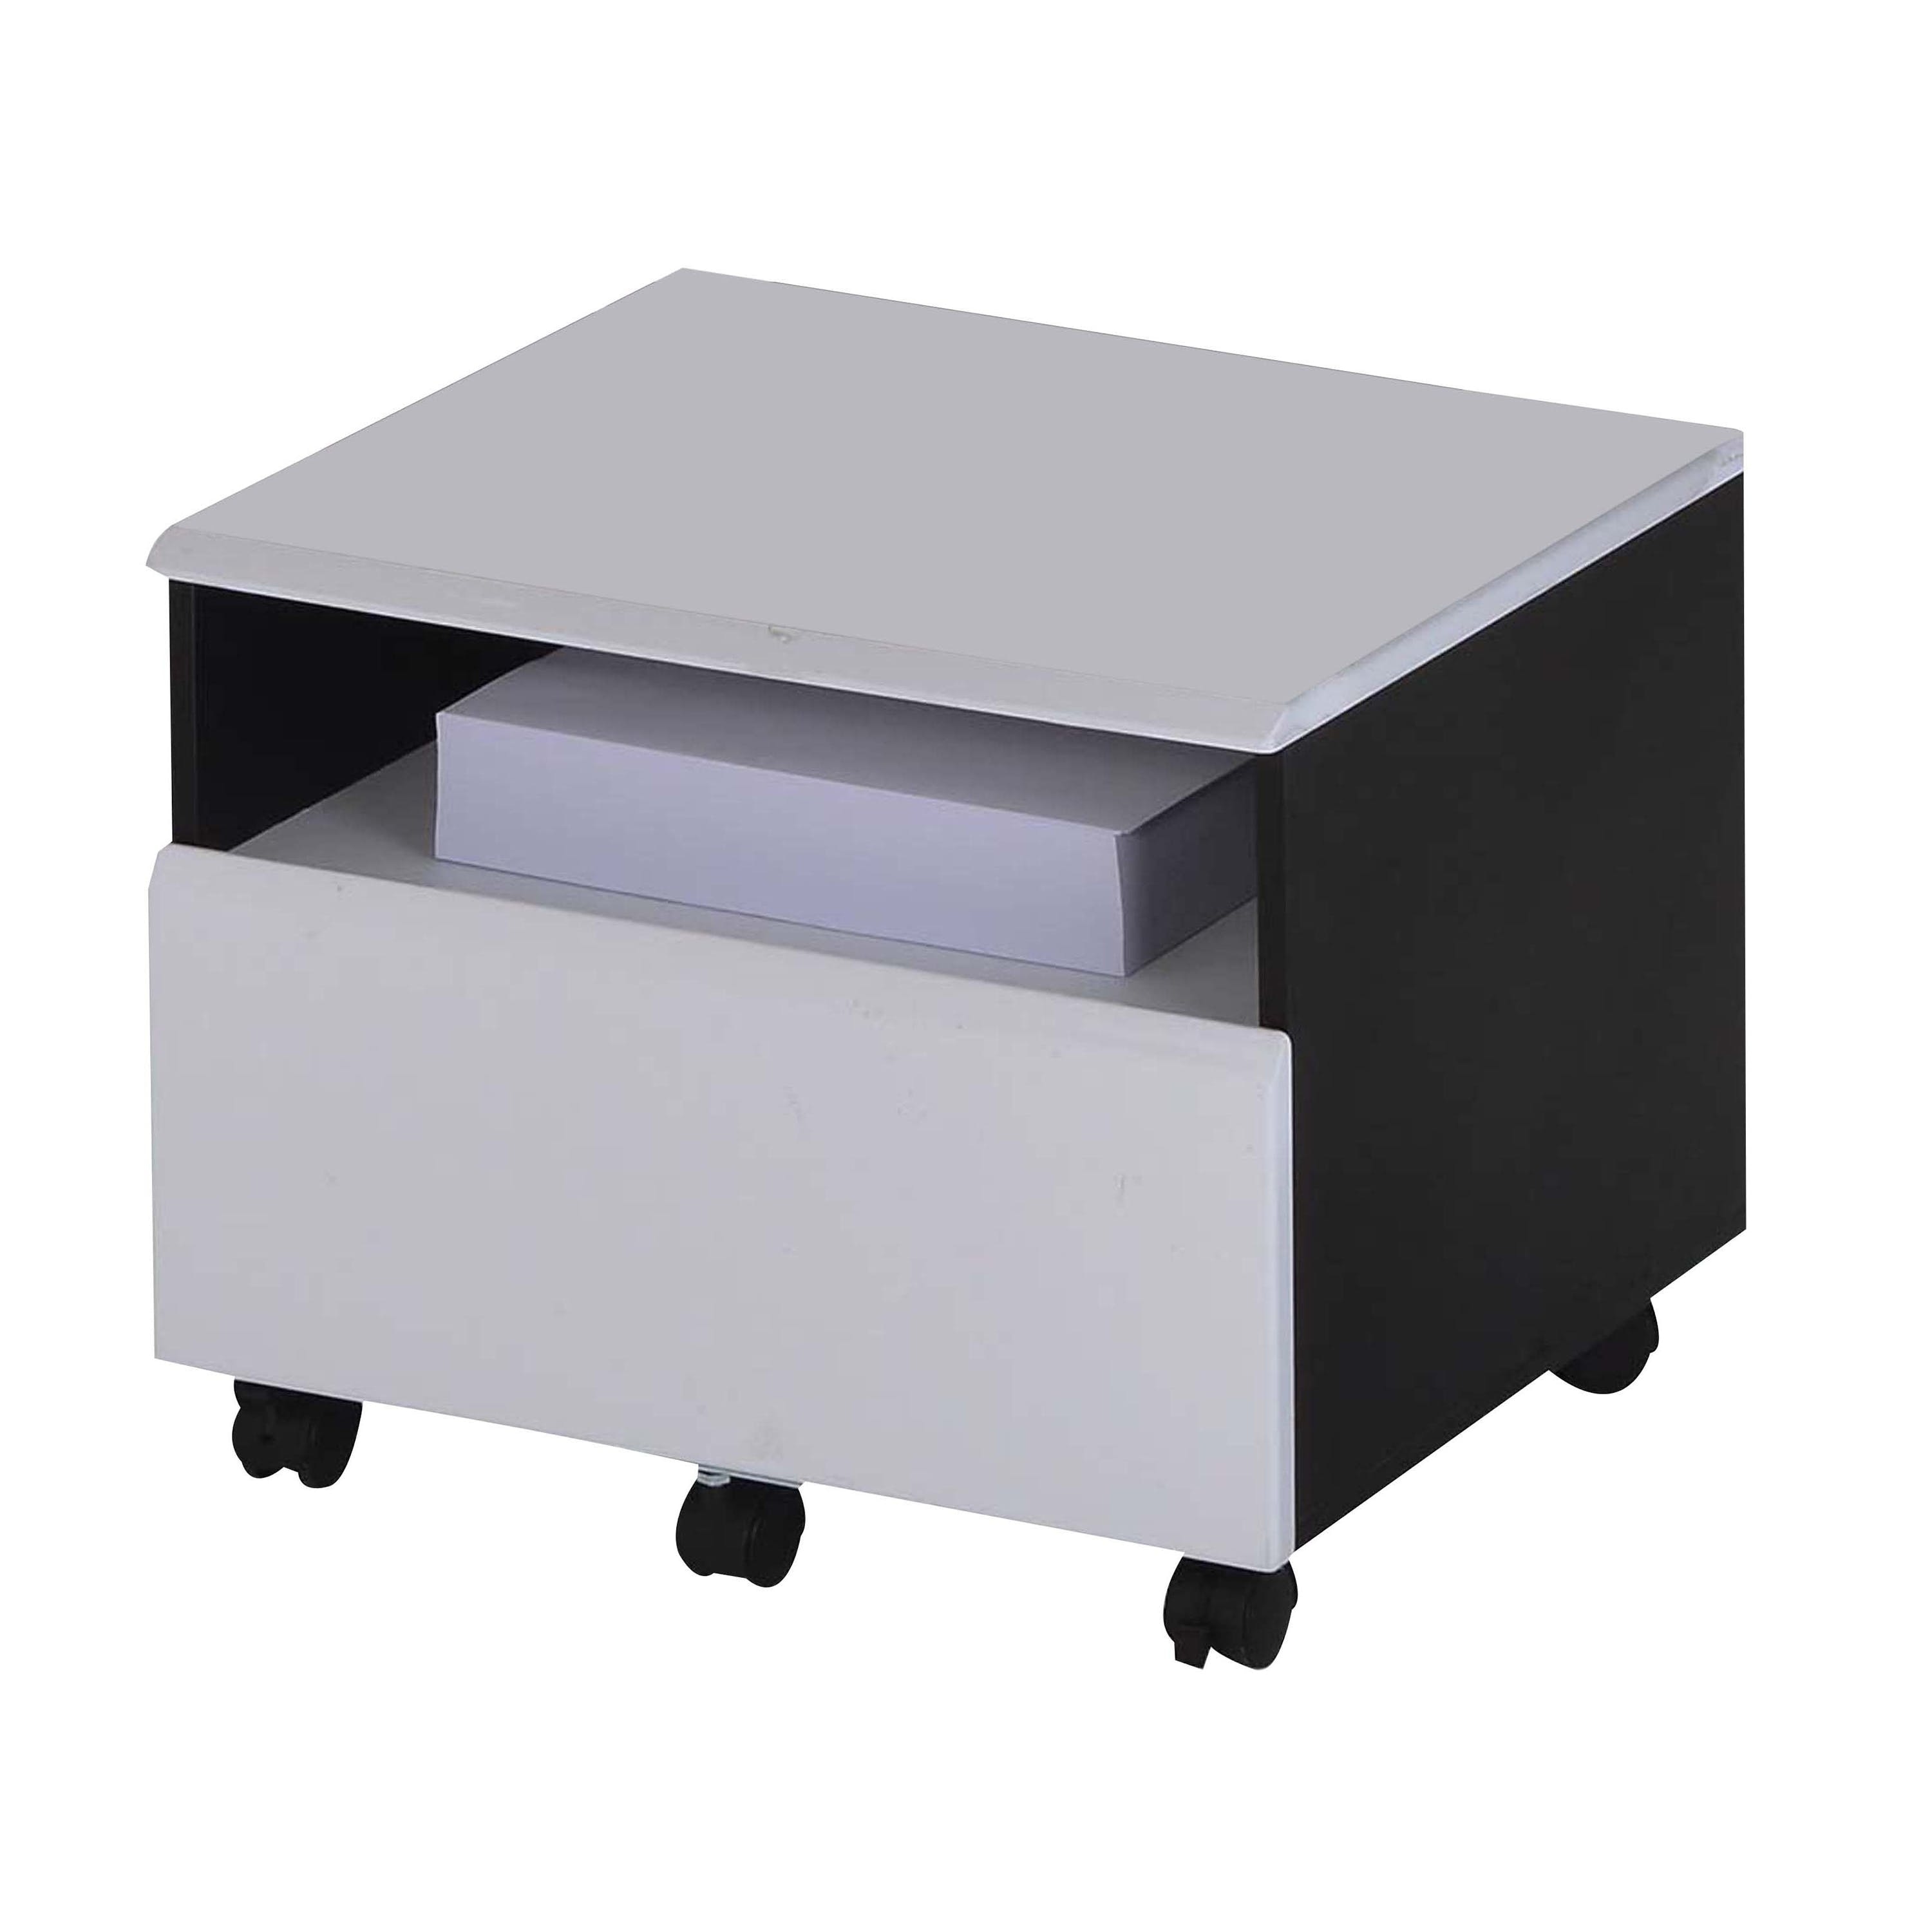 Wooden File Cabinet With Caster Wheels Black And White White